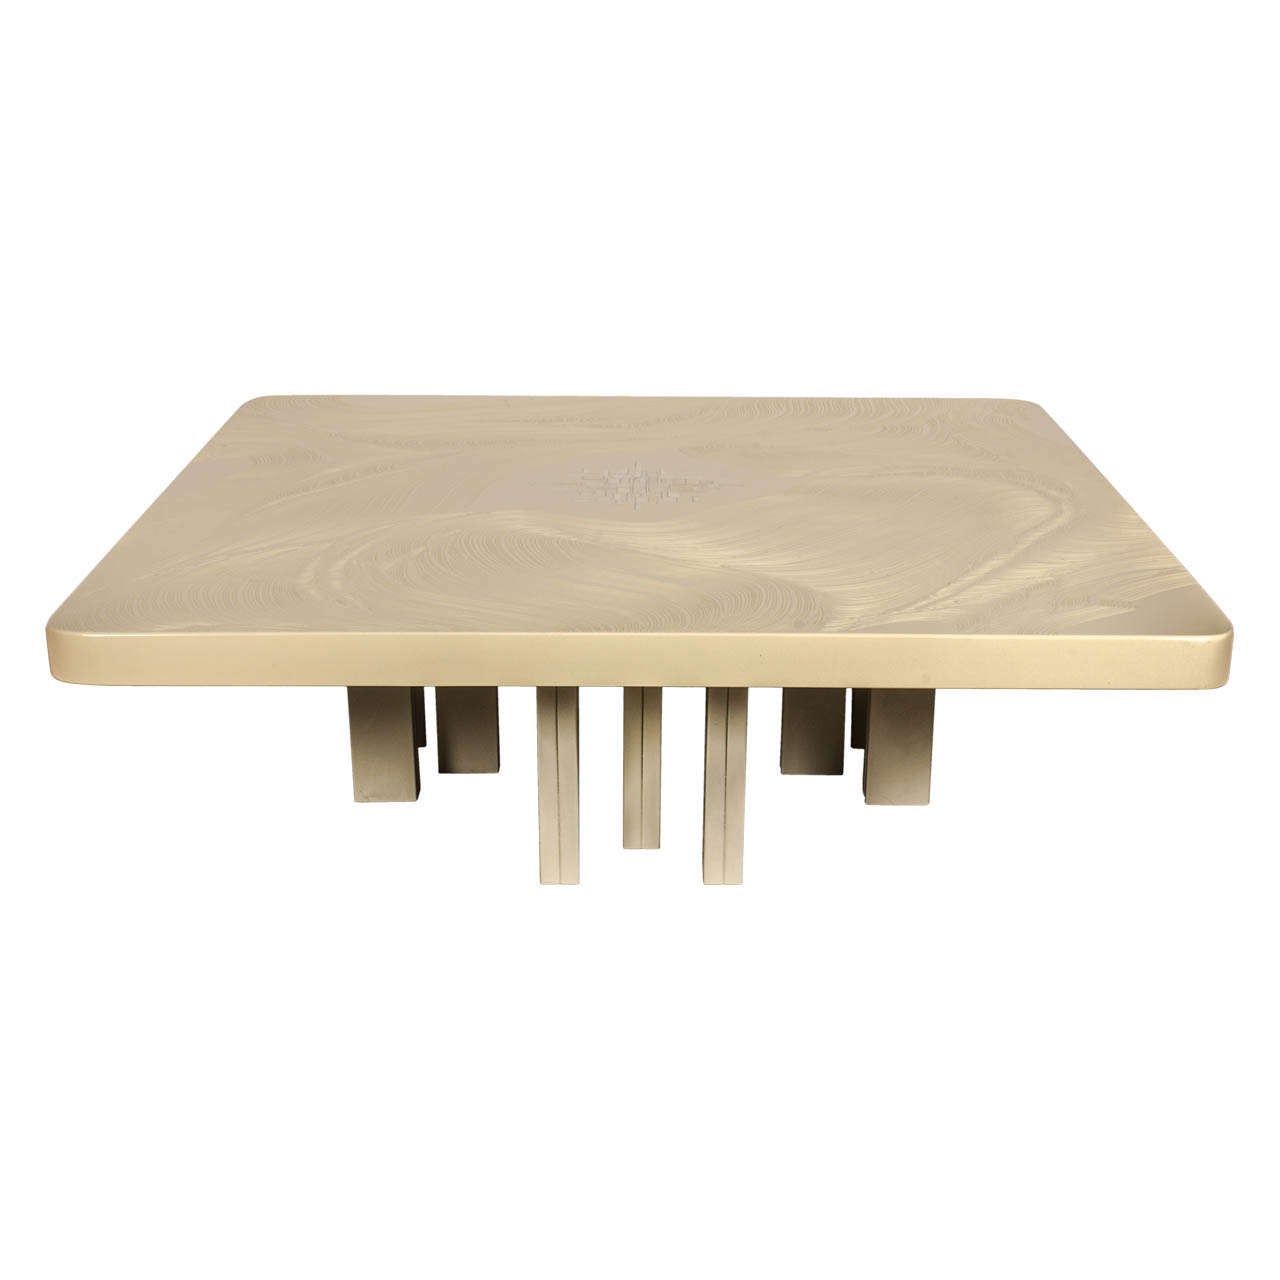 A Modernist Square Coffee Table by Fernand Dresse